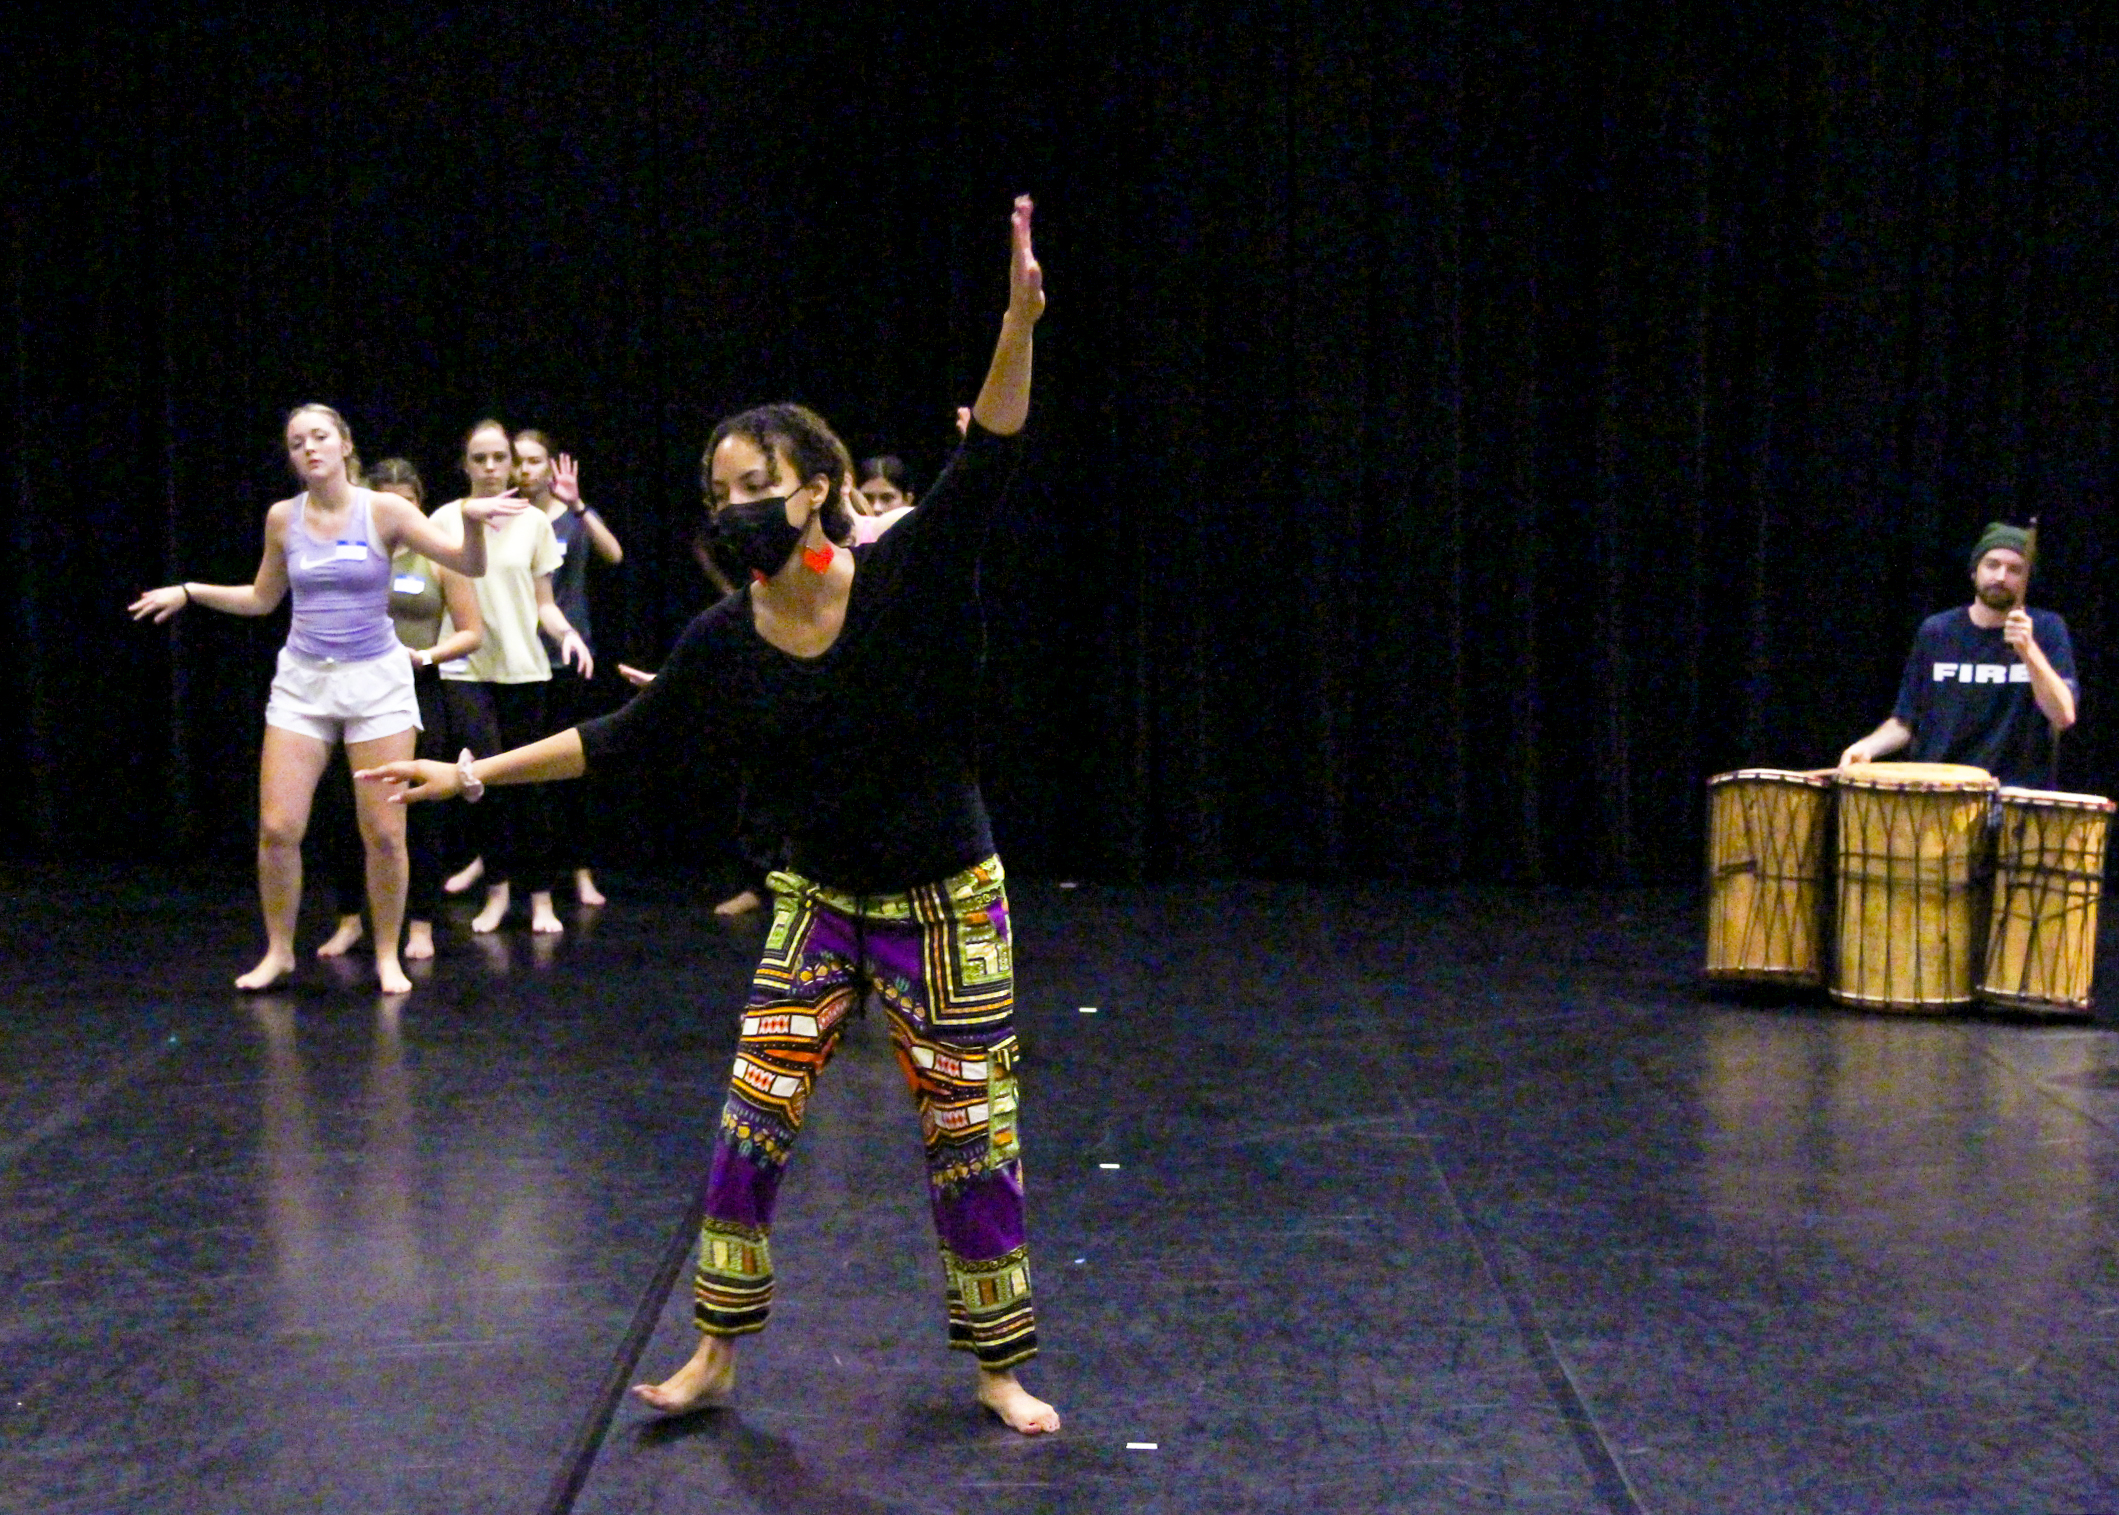 A professor demonstrates movements associated with West African dance for students standing in two lines behind her while a man at the side of the Roberts Theatre stage keeps rhythm on a set of drums.